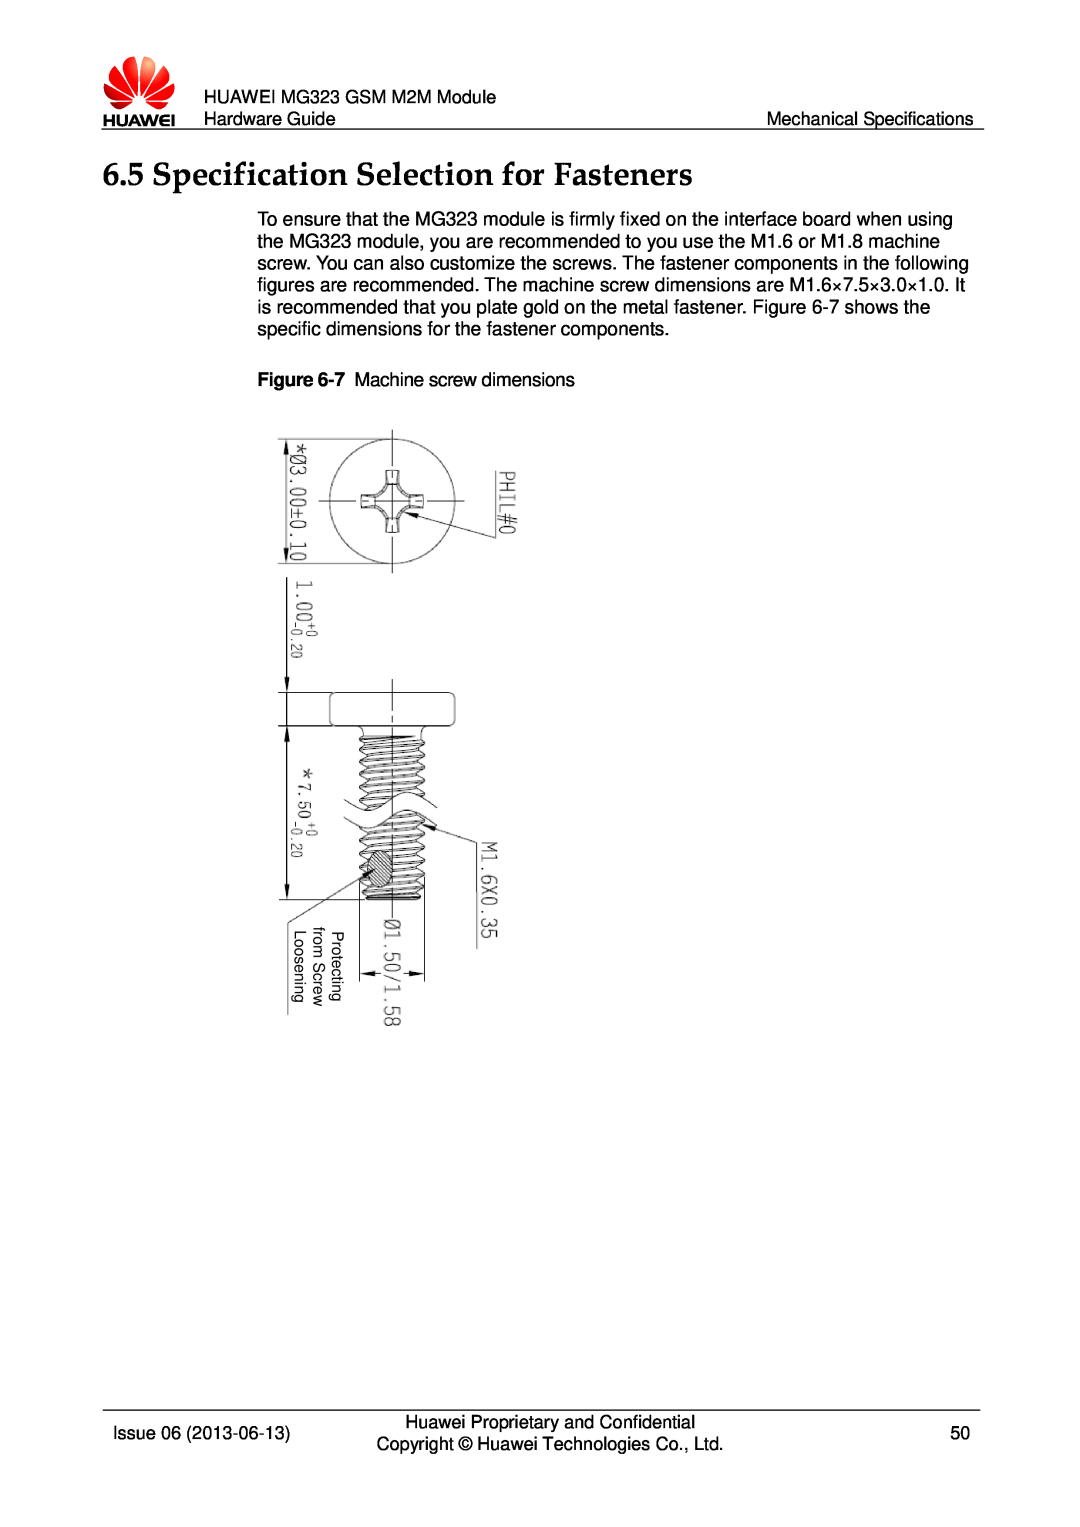 Huawei MG323 manual Specification Selection for Fasteners 